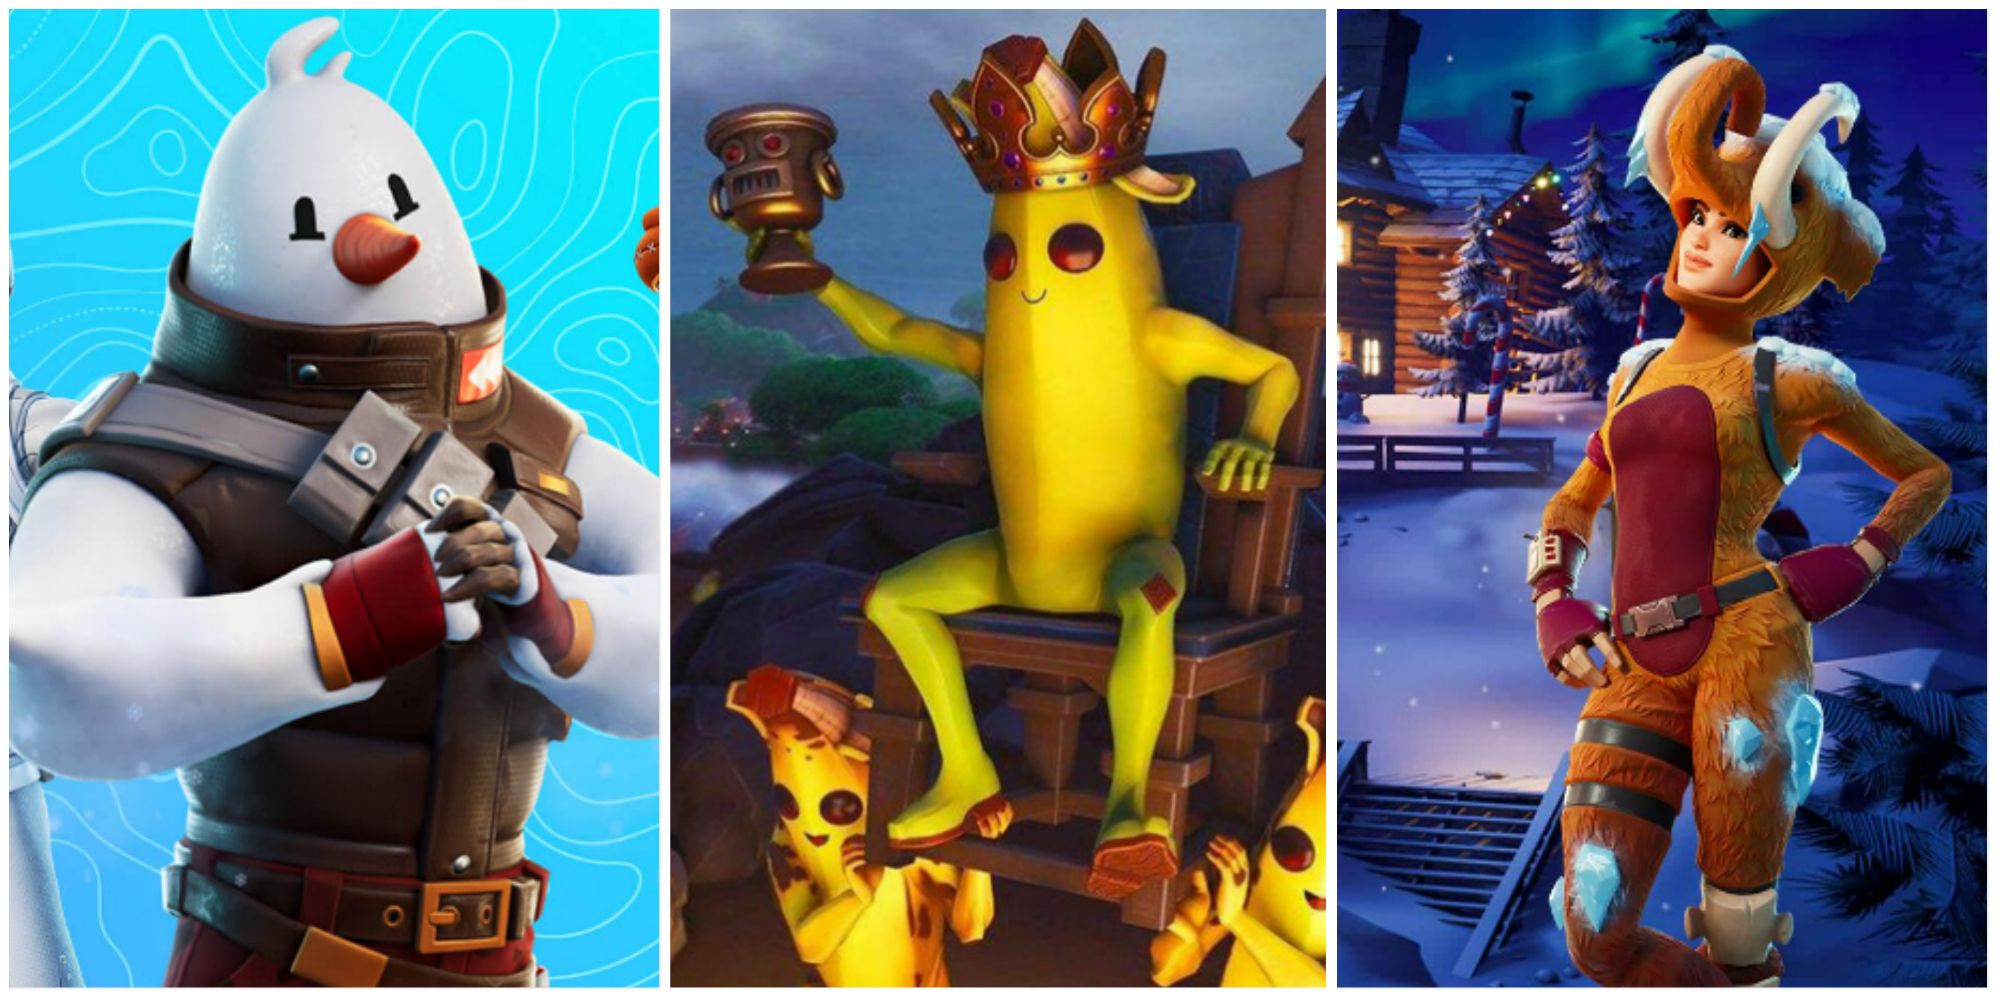 fortnite snowmando character, peely character on throne, wooly character winterfest featured